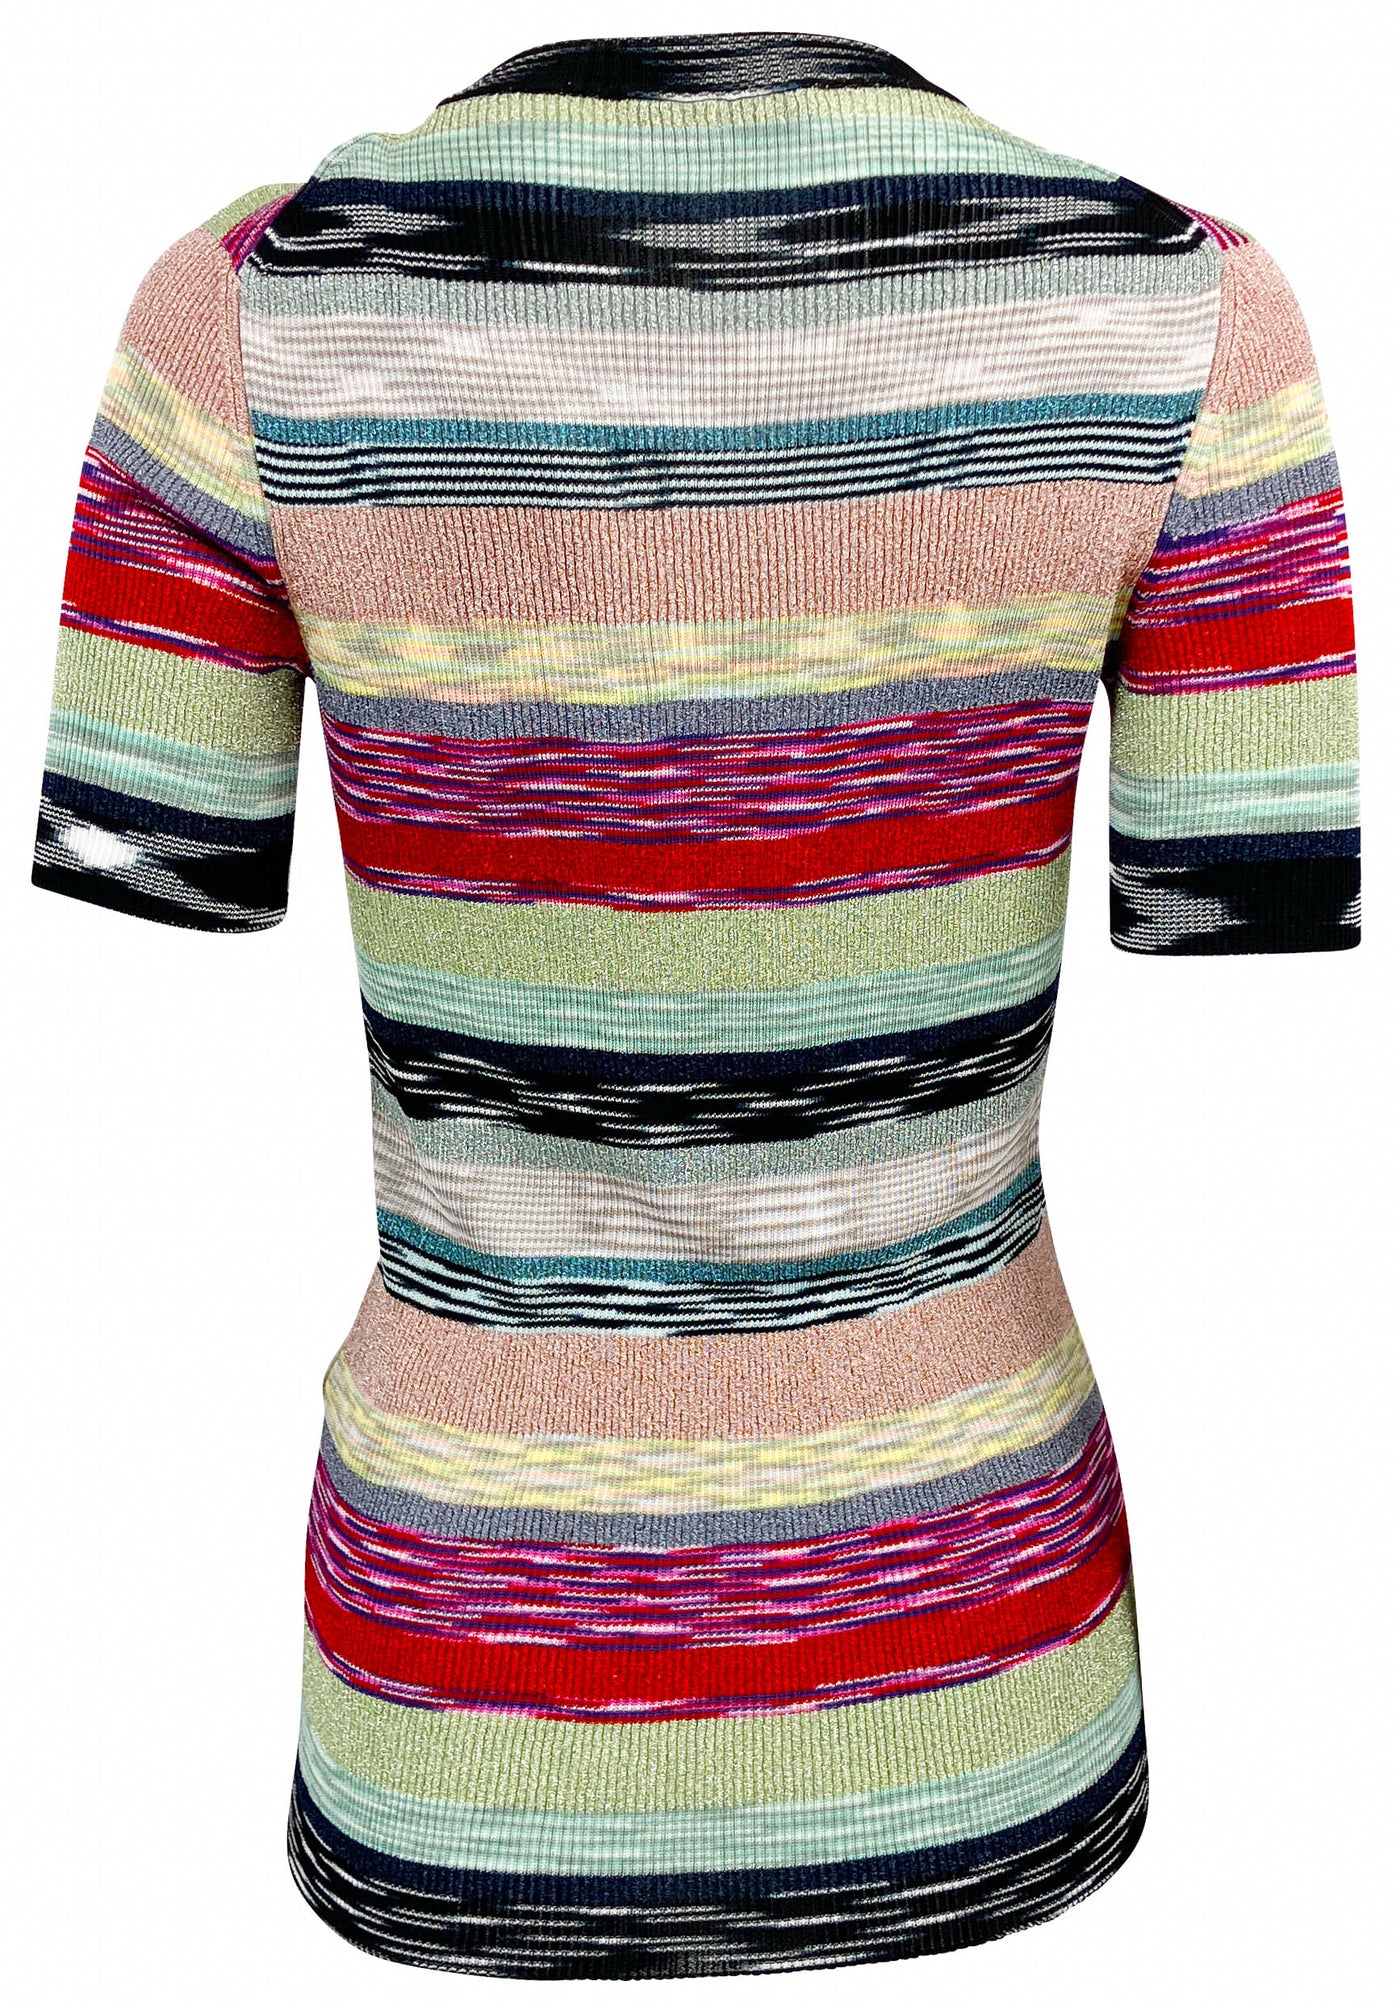 Missoni Striped Knit Short Sleeve Top in Multi - Discounts on Missoni at UAL